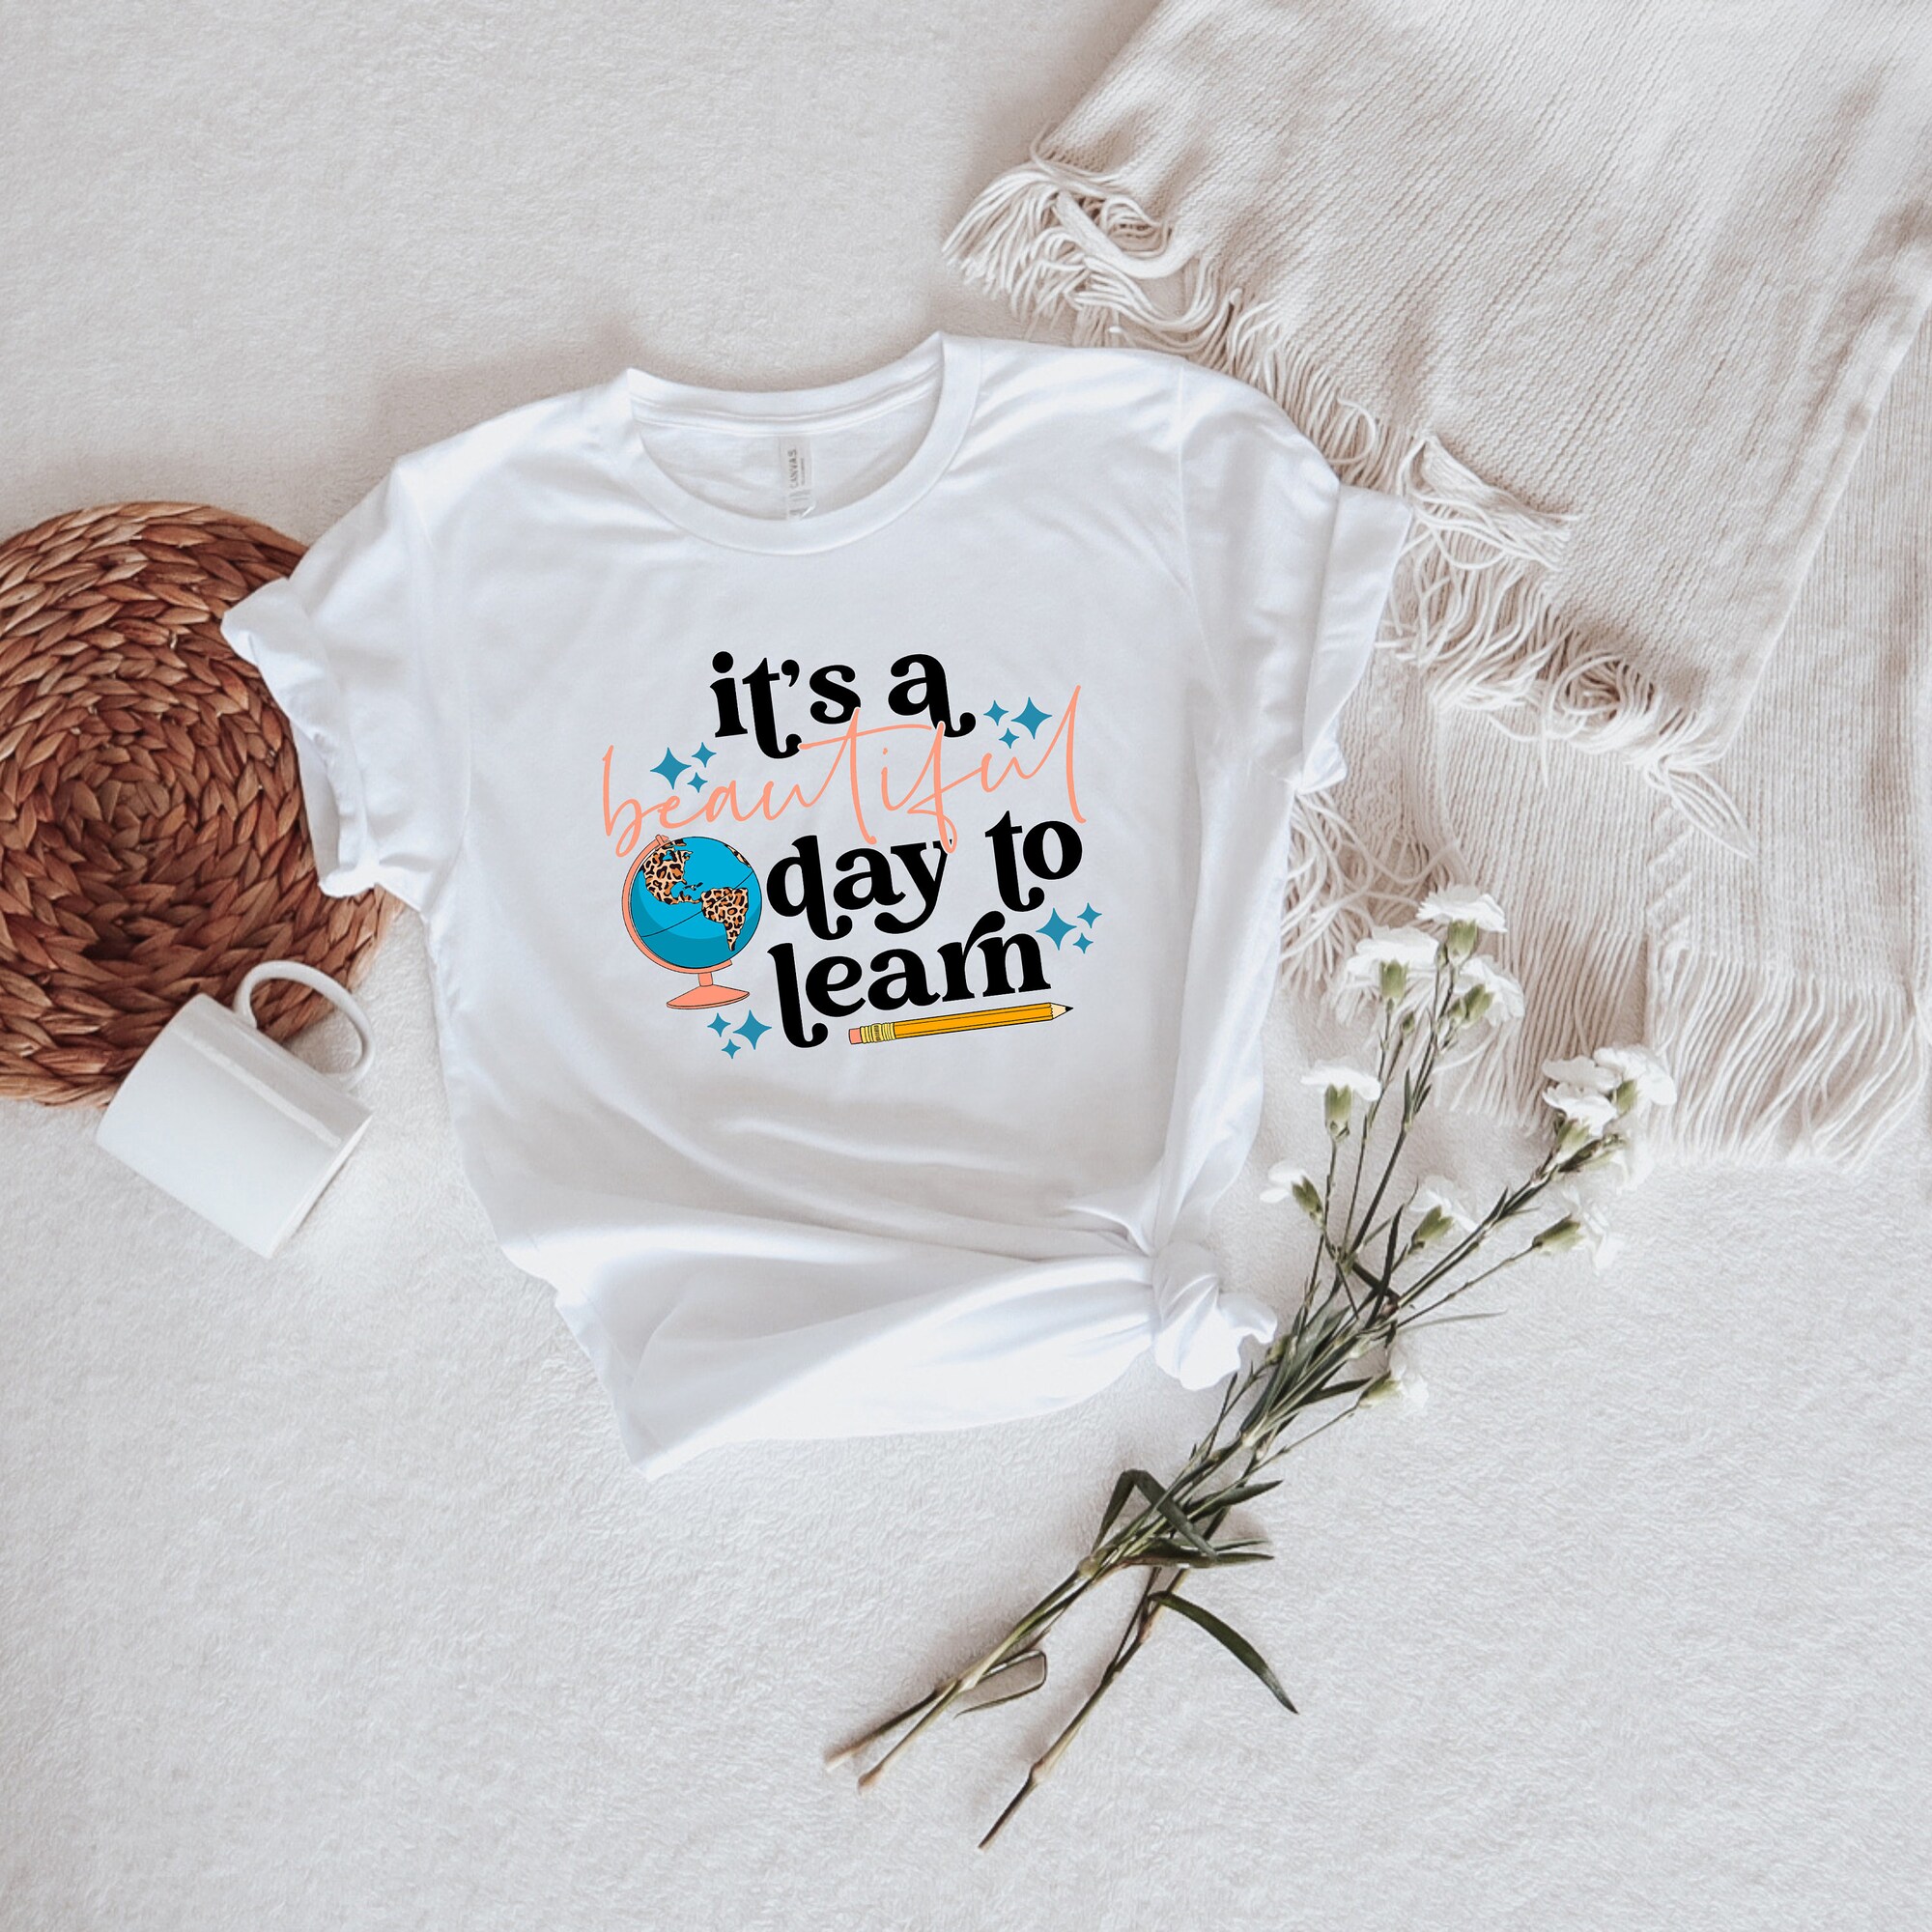 It Is A Beautiful Day To Learn Shirt